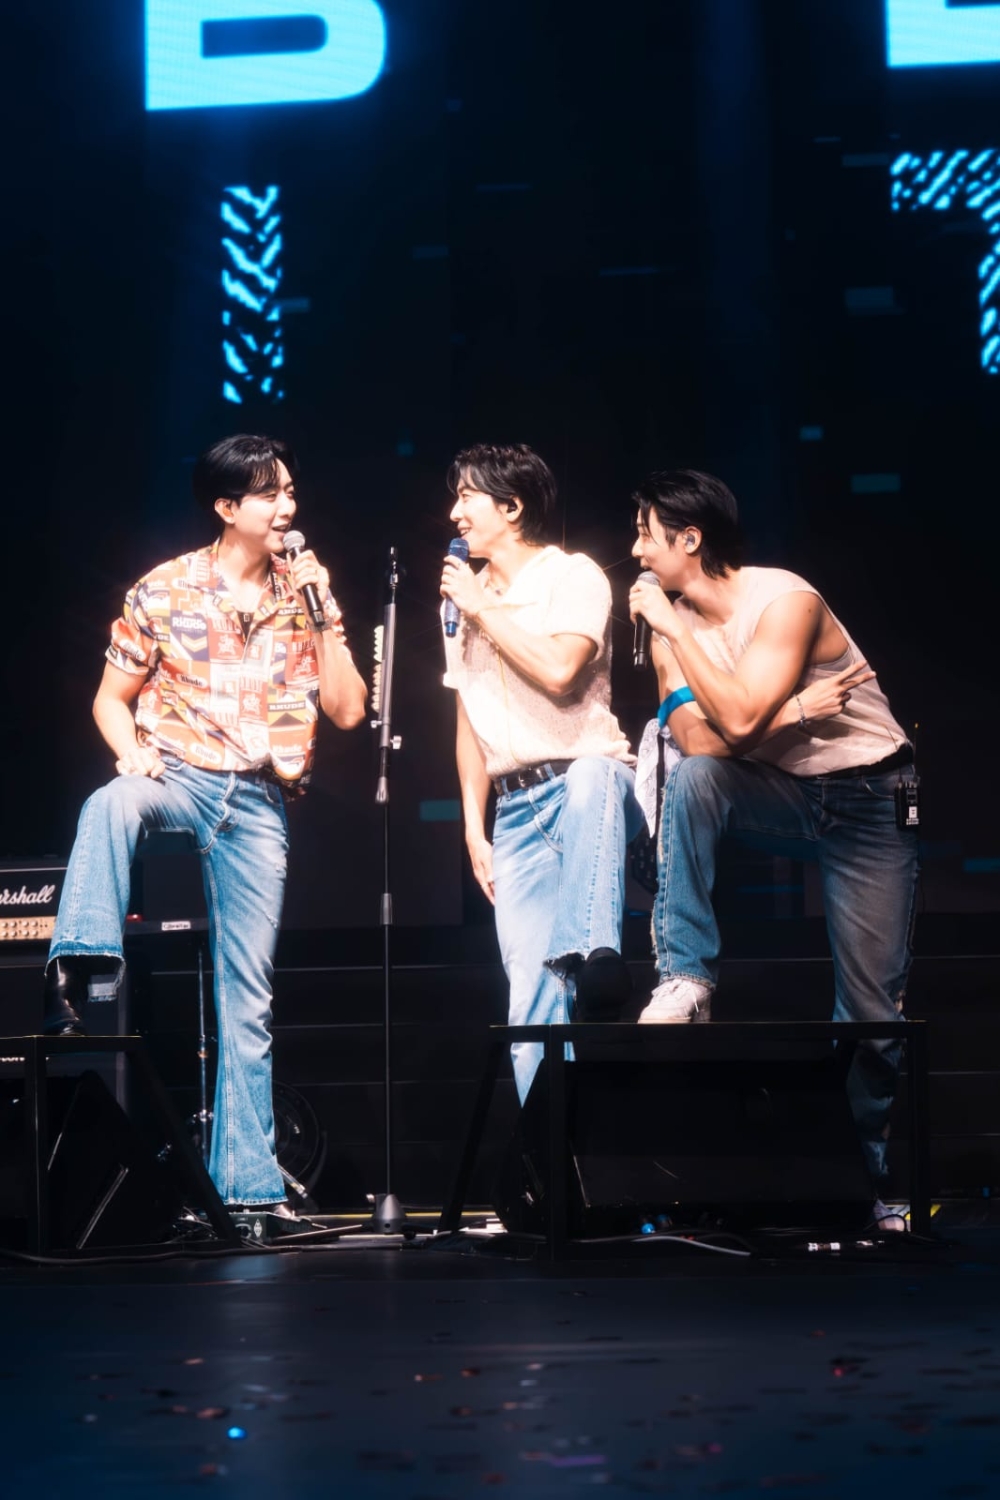 CNBLUE comprising of lead vocalist and guitarist Jong Yong-hwa (middle), bassist Lee Jung-shin (left) and drummer Kang Min-hyuk (right)  captivated the audience throughout the night. — Picture courtesy of Lo-Fi Entertainment